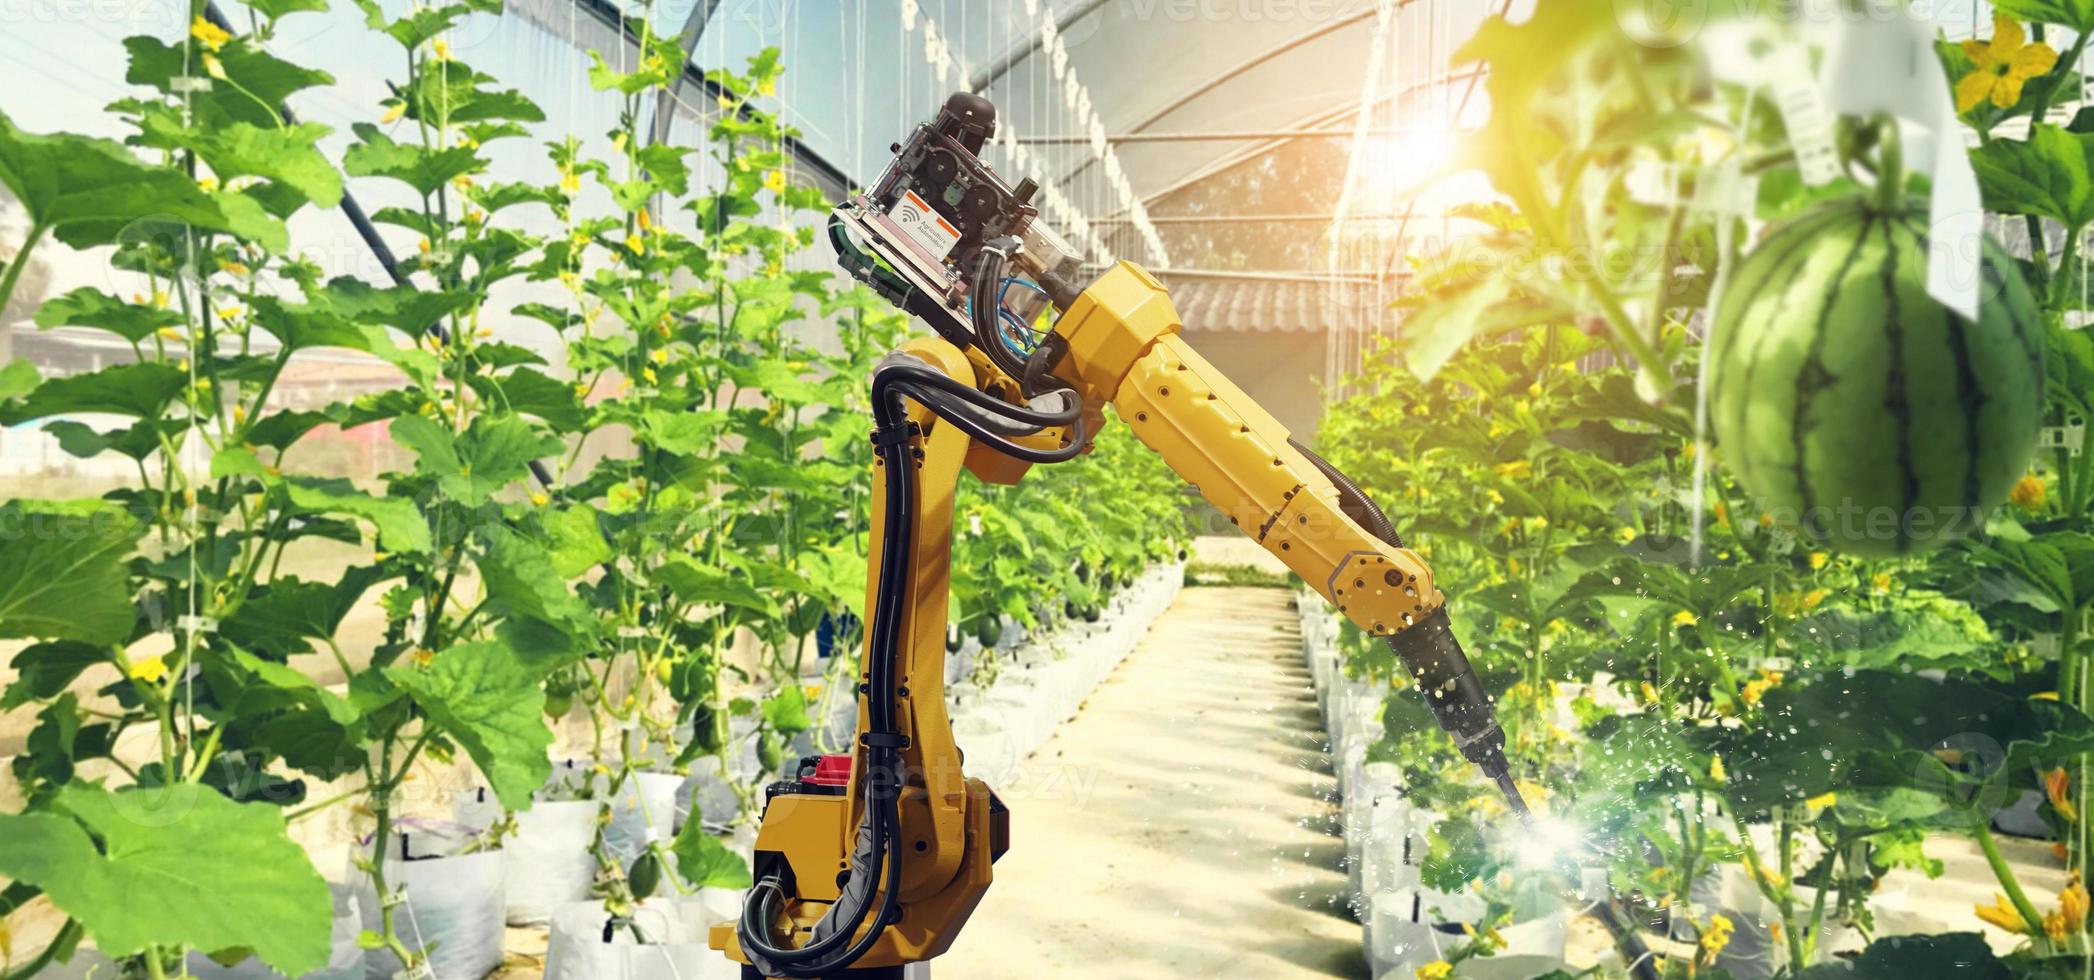 Artificial intelligence. Pollinate of fruits and vegetables with robot. Detection spray chemical. Leaf analysis and oliar fertilization. Agriculture farming technology concept. photo